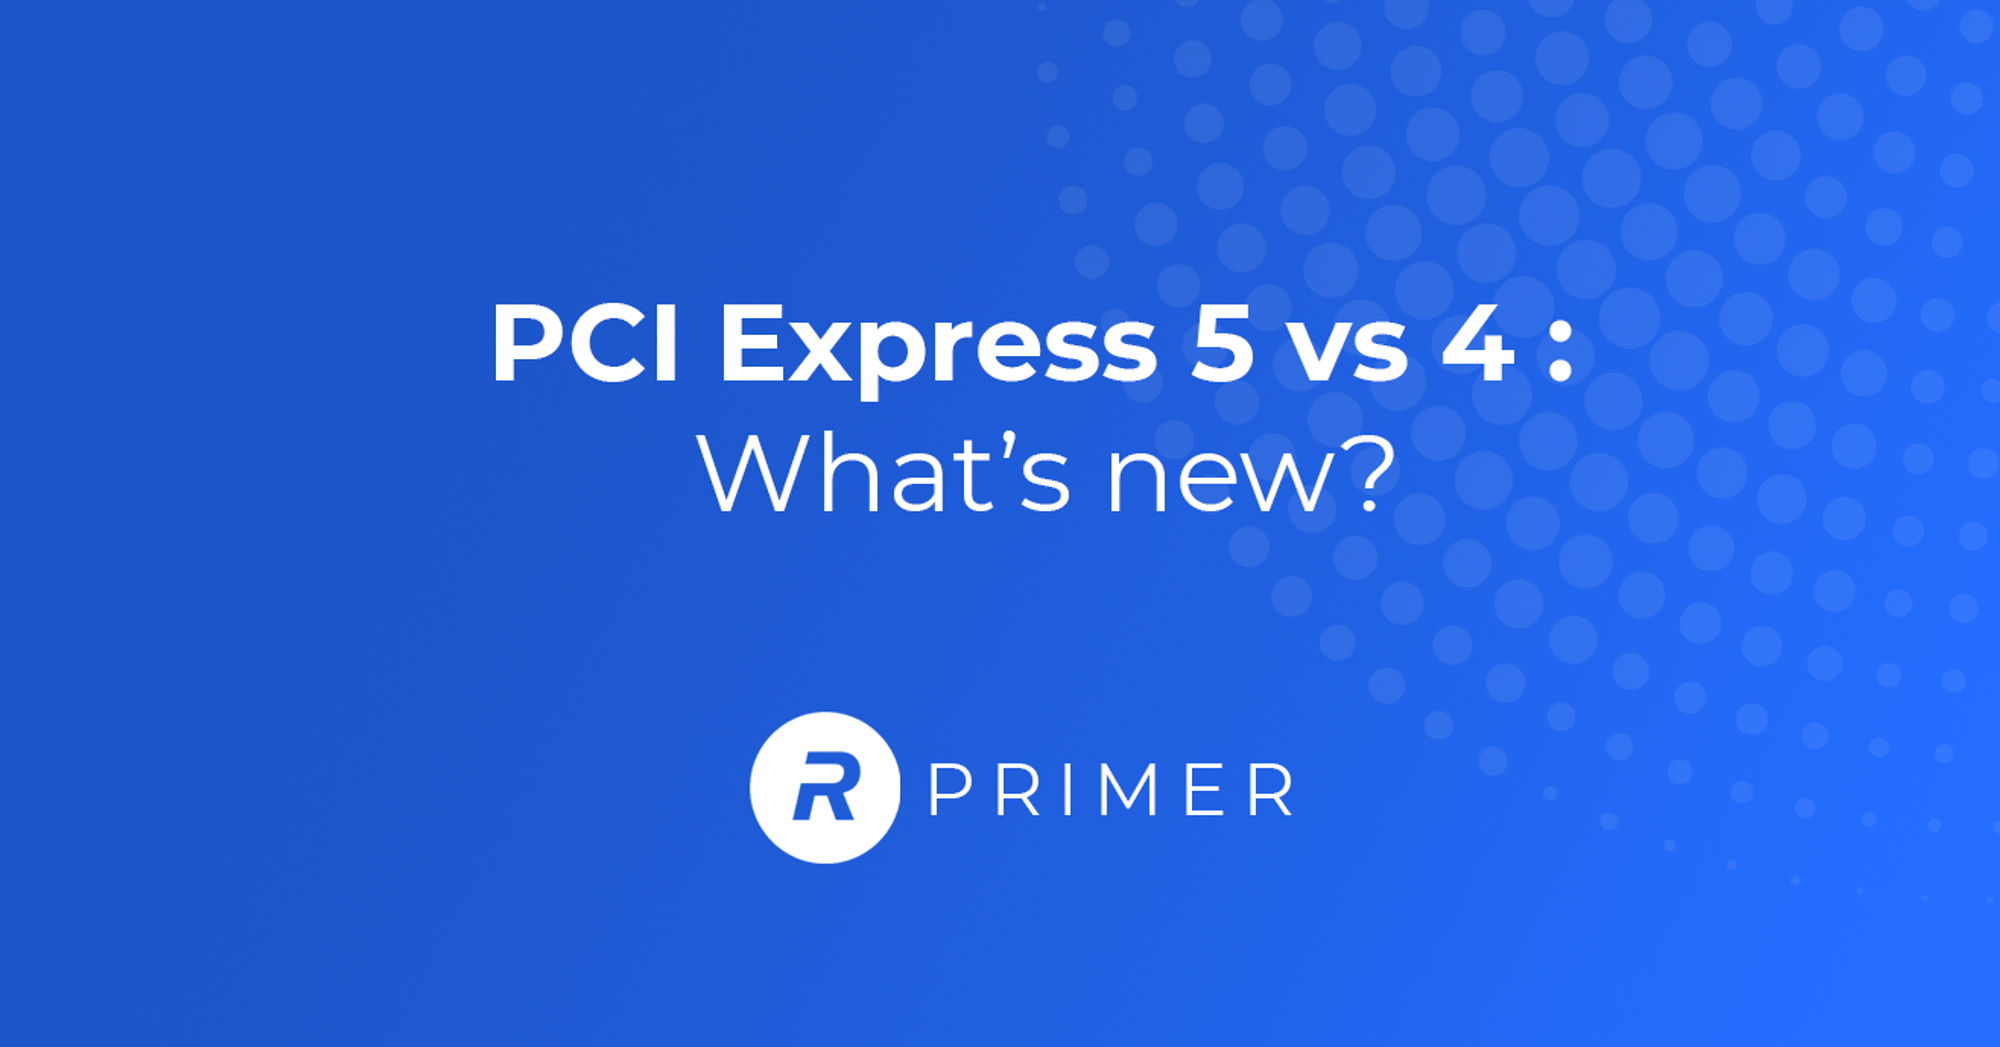 PCI Express 5 vs. 4: What’s New? [Everything You Need to Know]